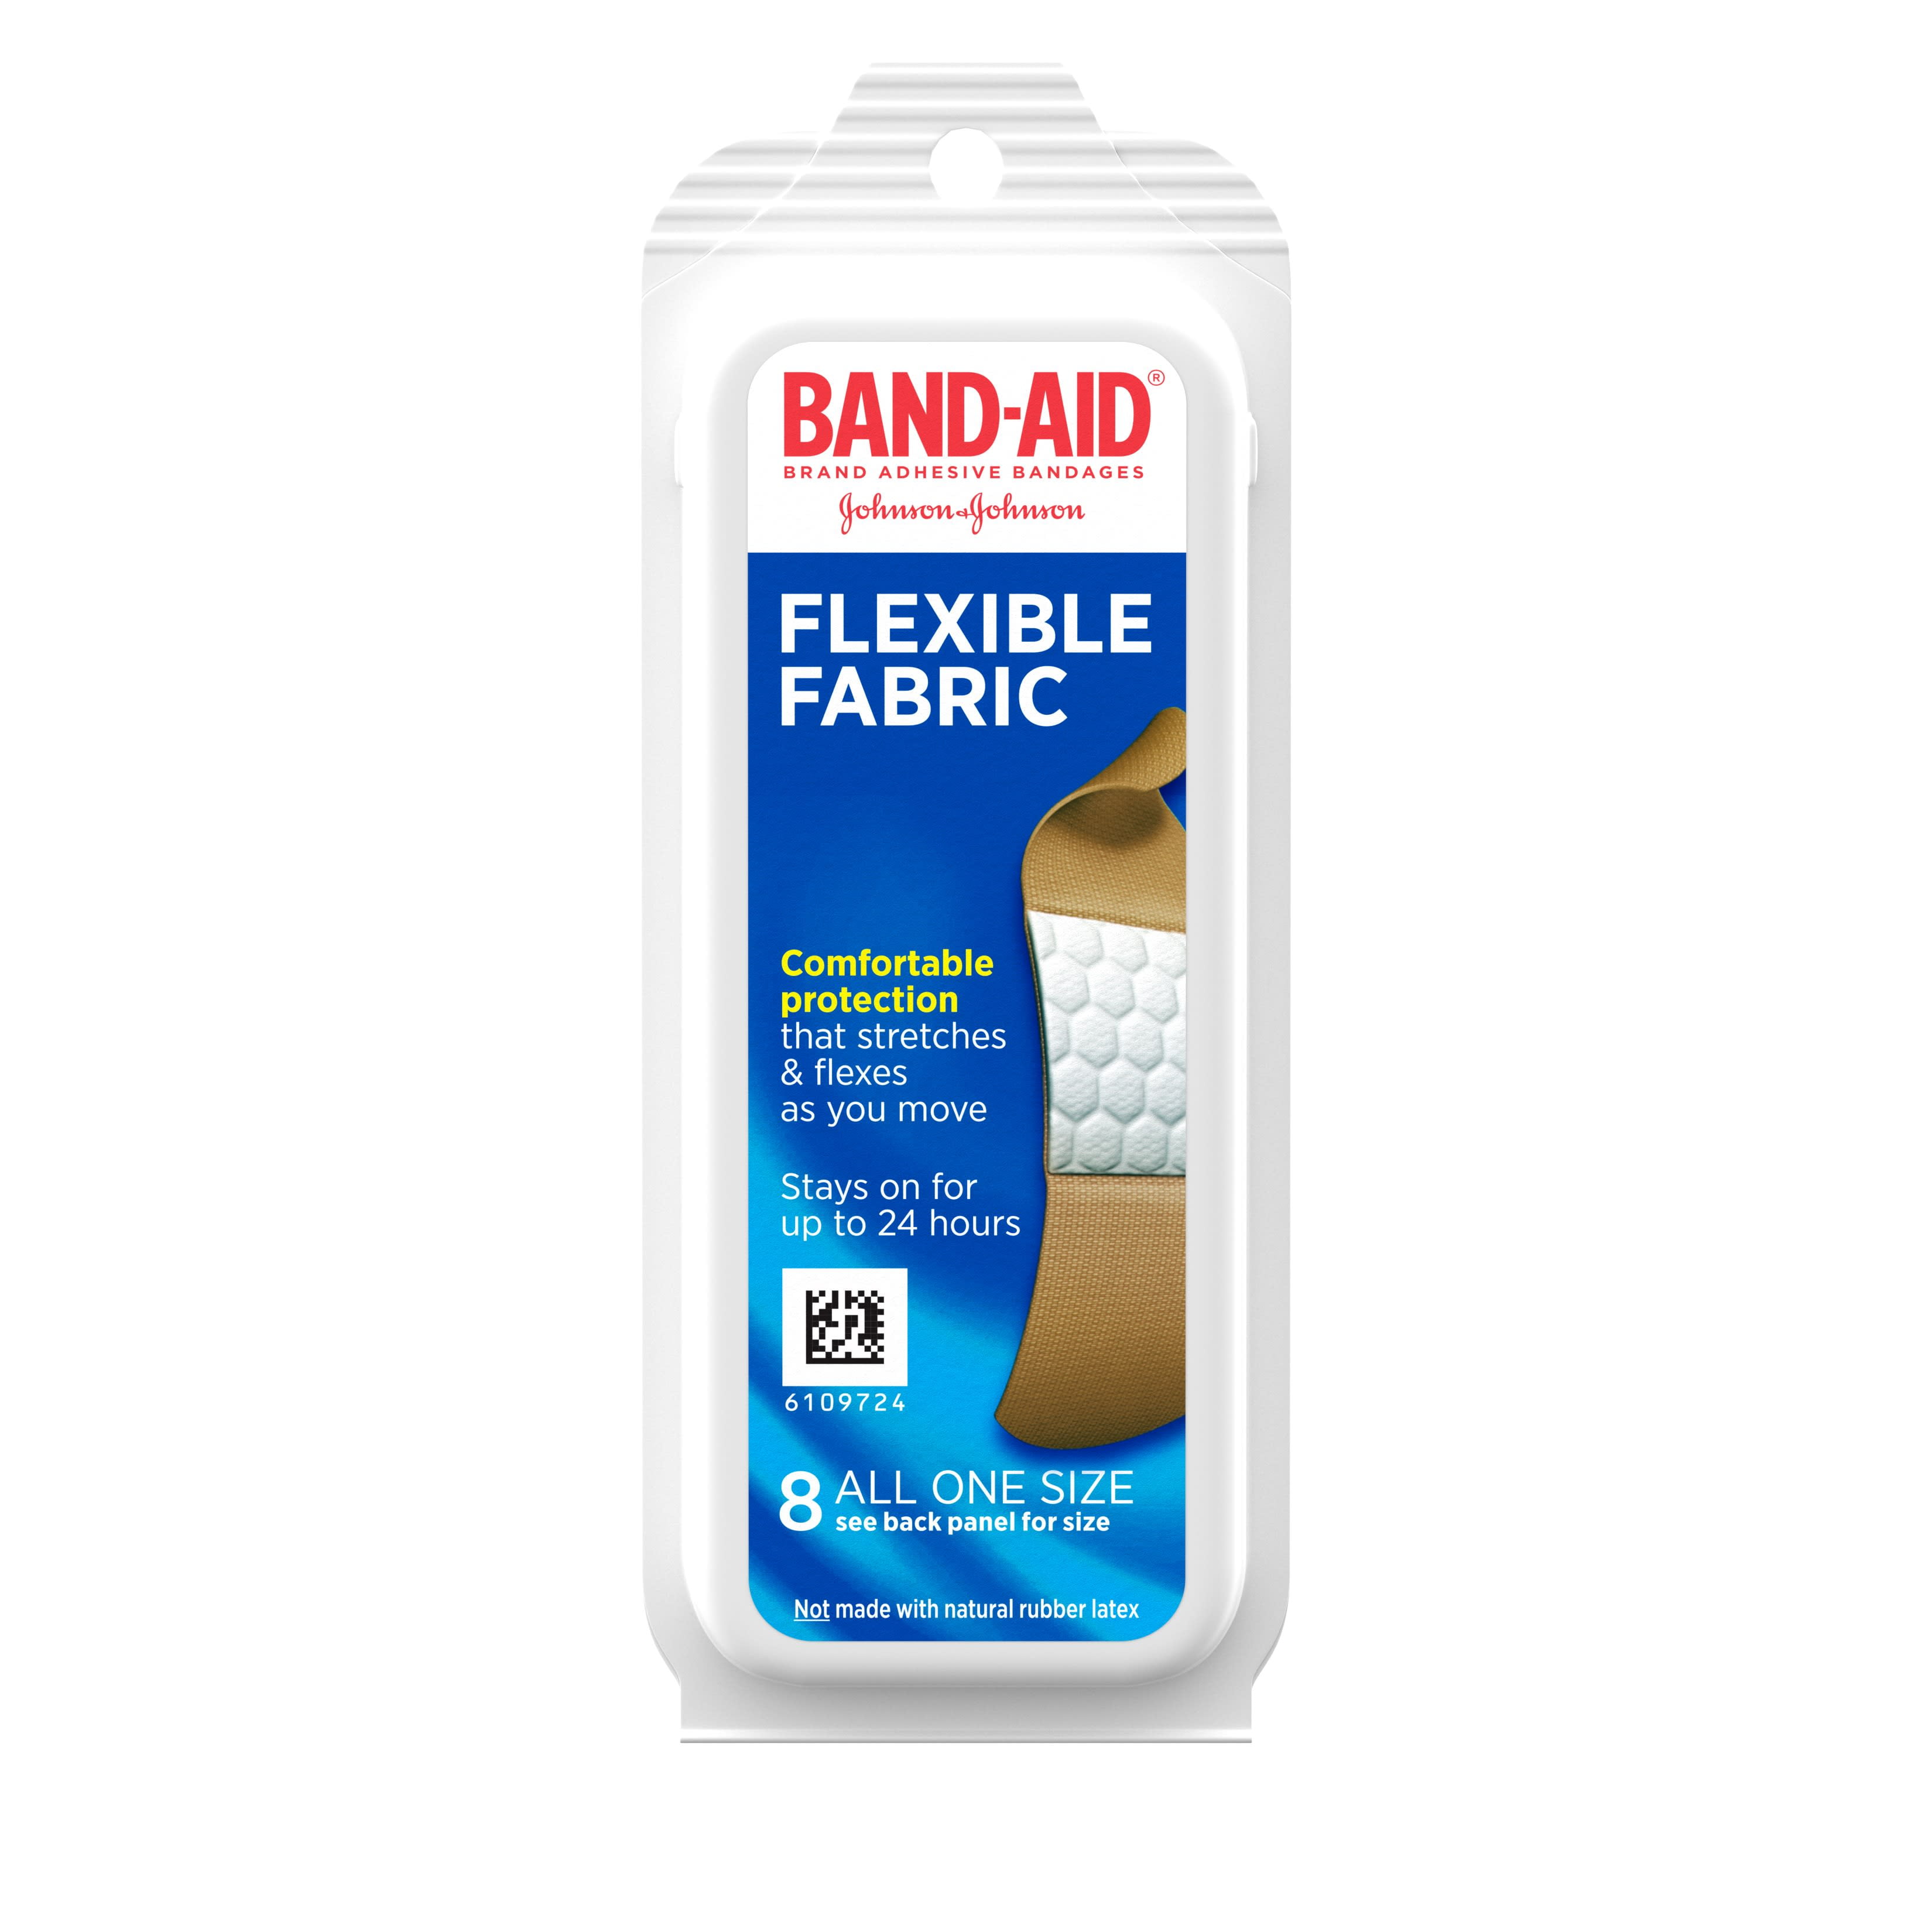 CASE OF 12 Blue 2 inch Self-Adhering Flexible Bandage for All Size Pets 